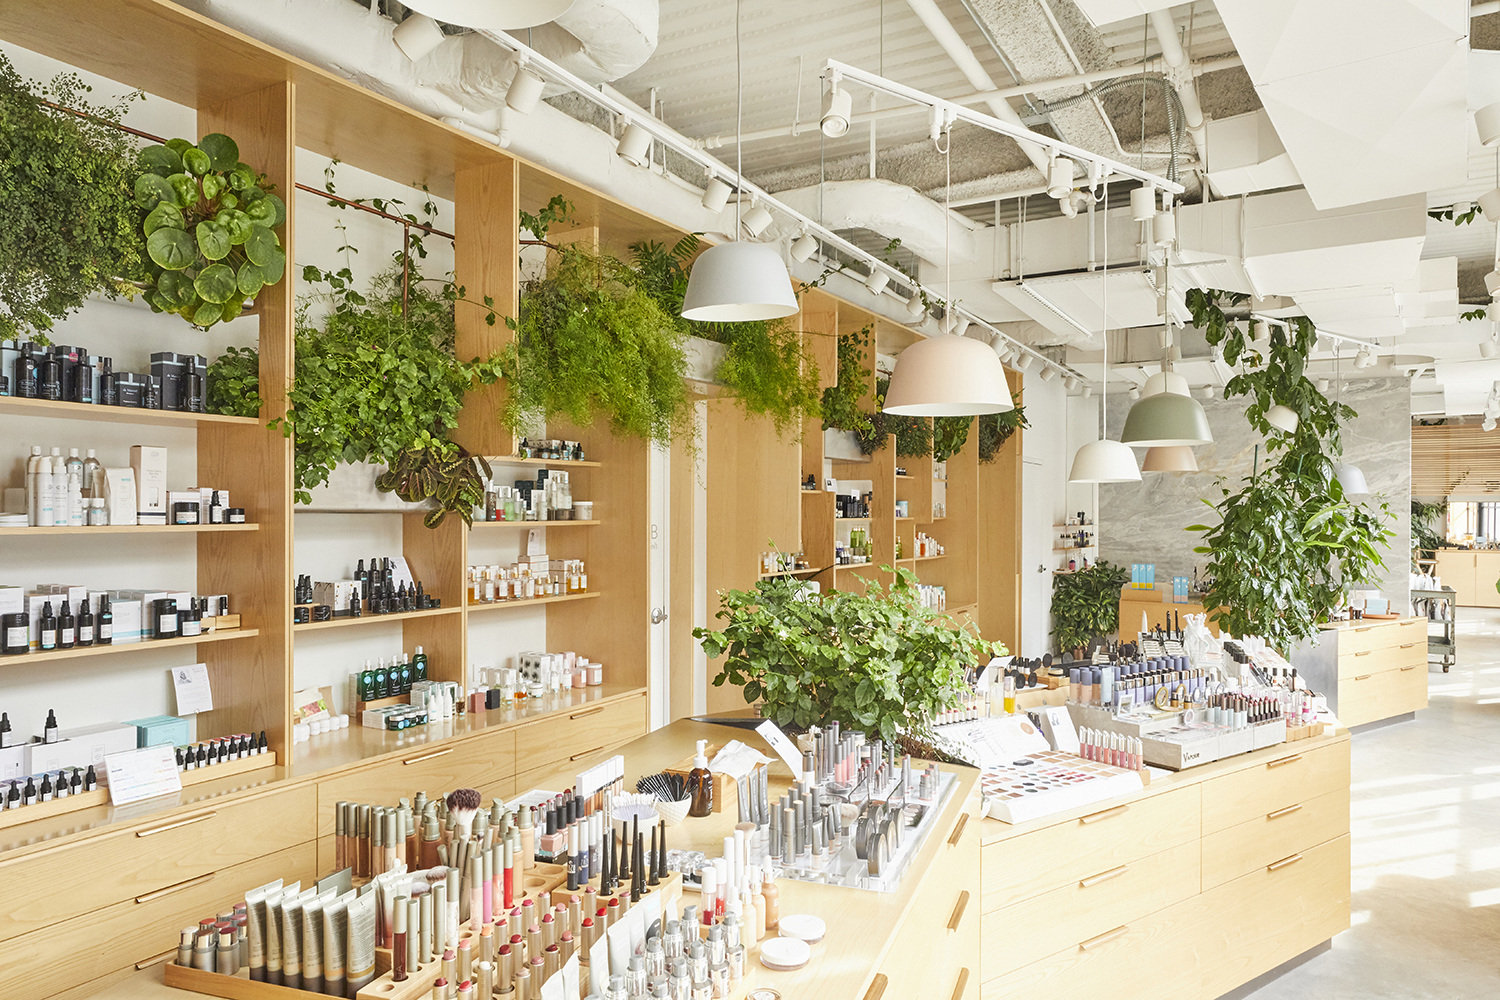 The Detox Market has been a trailblazer in the clean beauty industry since its inception as a pop-up in 2010. With their extensive experience predating the clean beauty trend, they have a strategic and carefully curated approach to sourcing and offering the absolute best in green beauty products. Trust their expertise and impeccable selection.